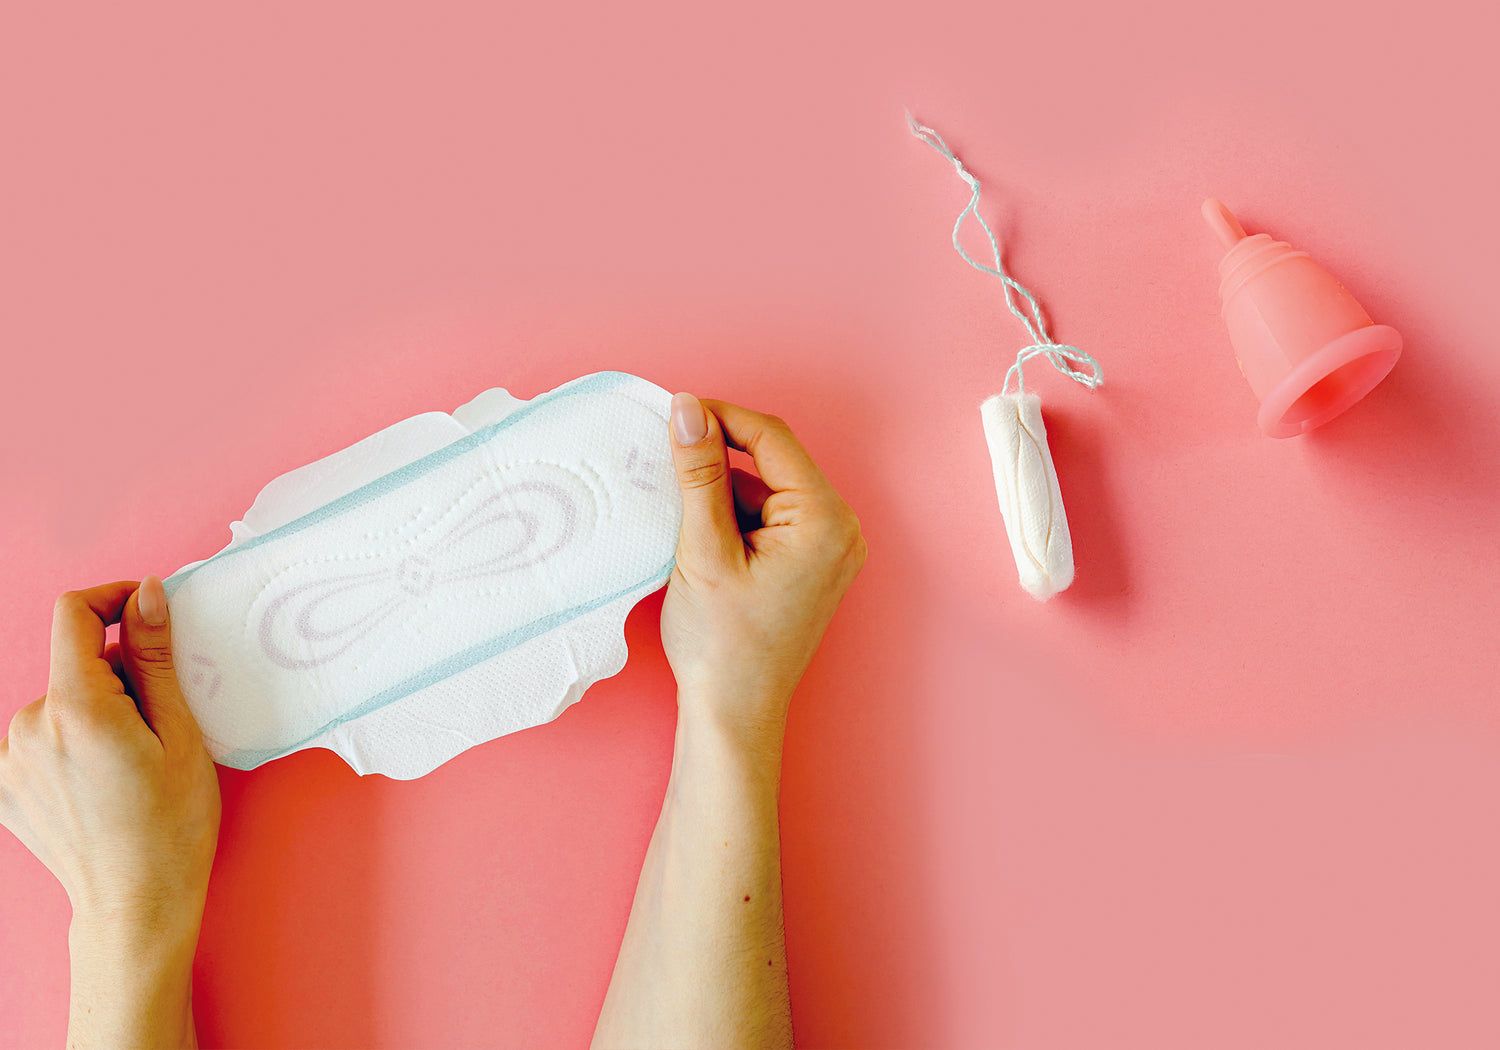 Pads vs Tampons vs Menstrual Cups: Know What’s Right For You